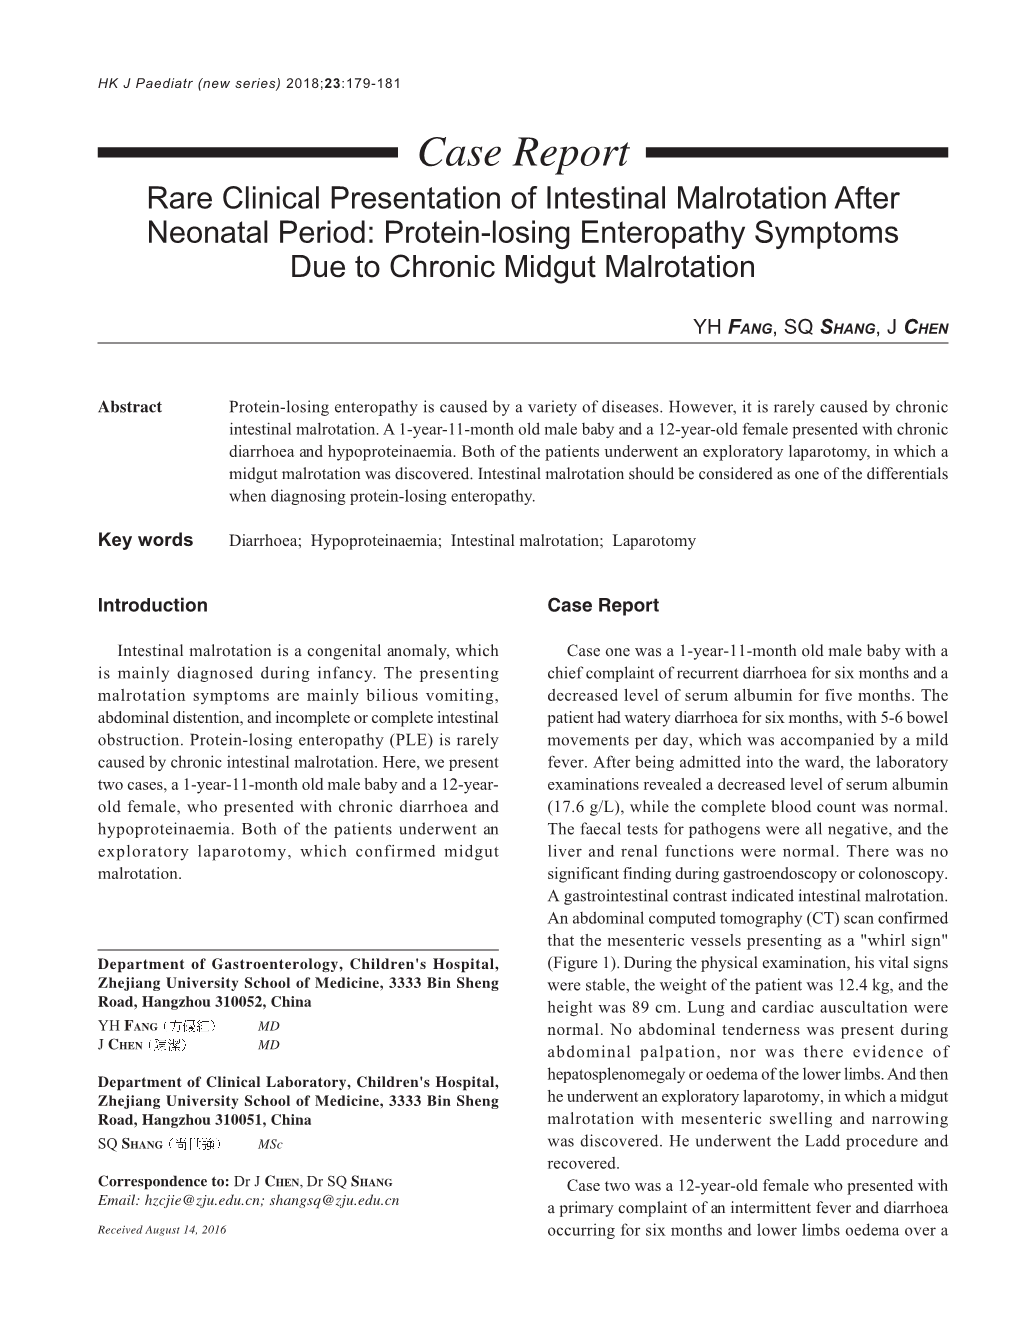 Case Report Rare Clinical Presentation of Intestinal Malrotation After Neonatal Period: Protein-Losing Enteropathy Symptoms Due to Chronic Midgut Malrotation